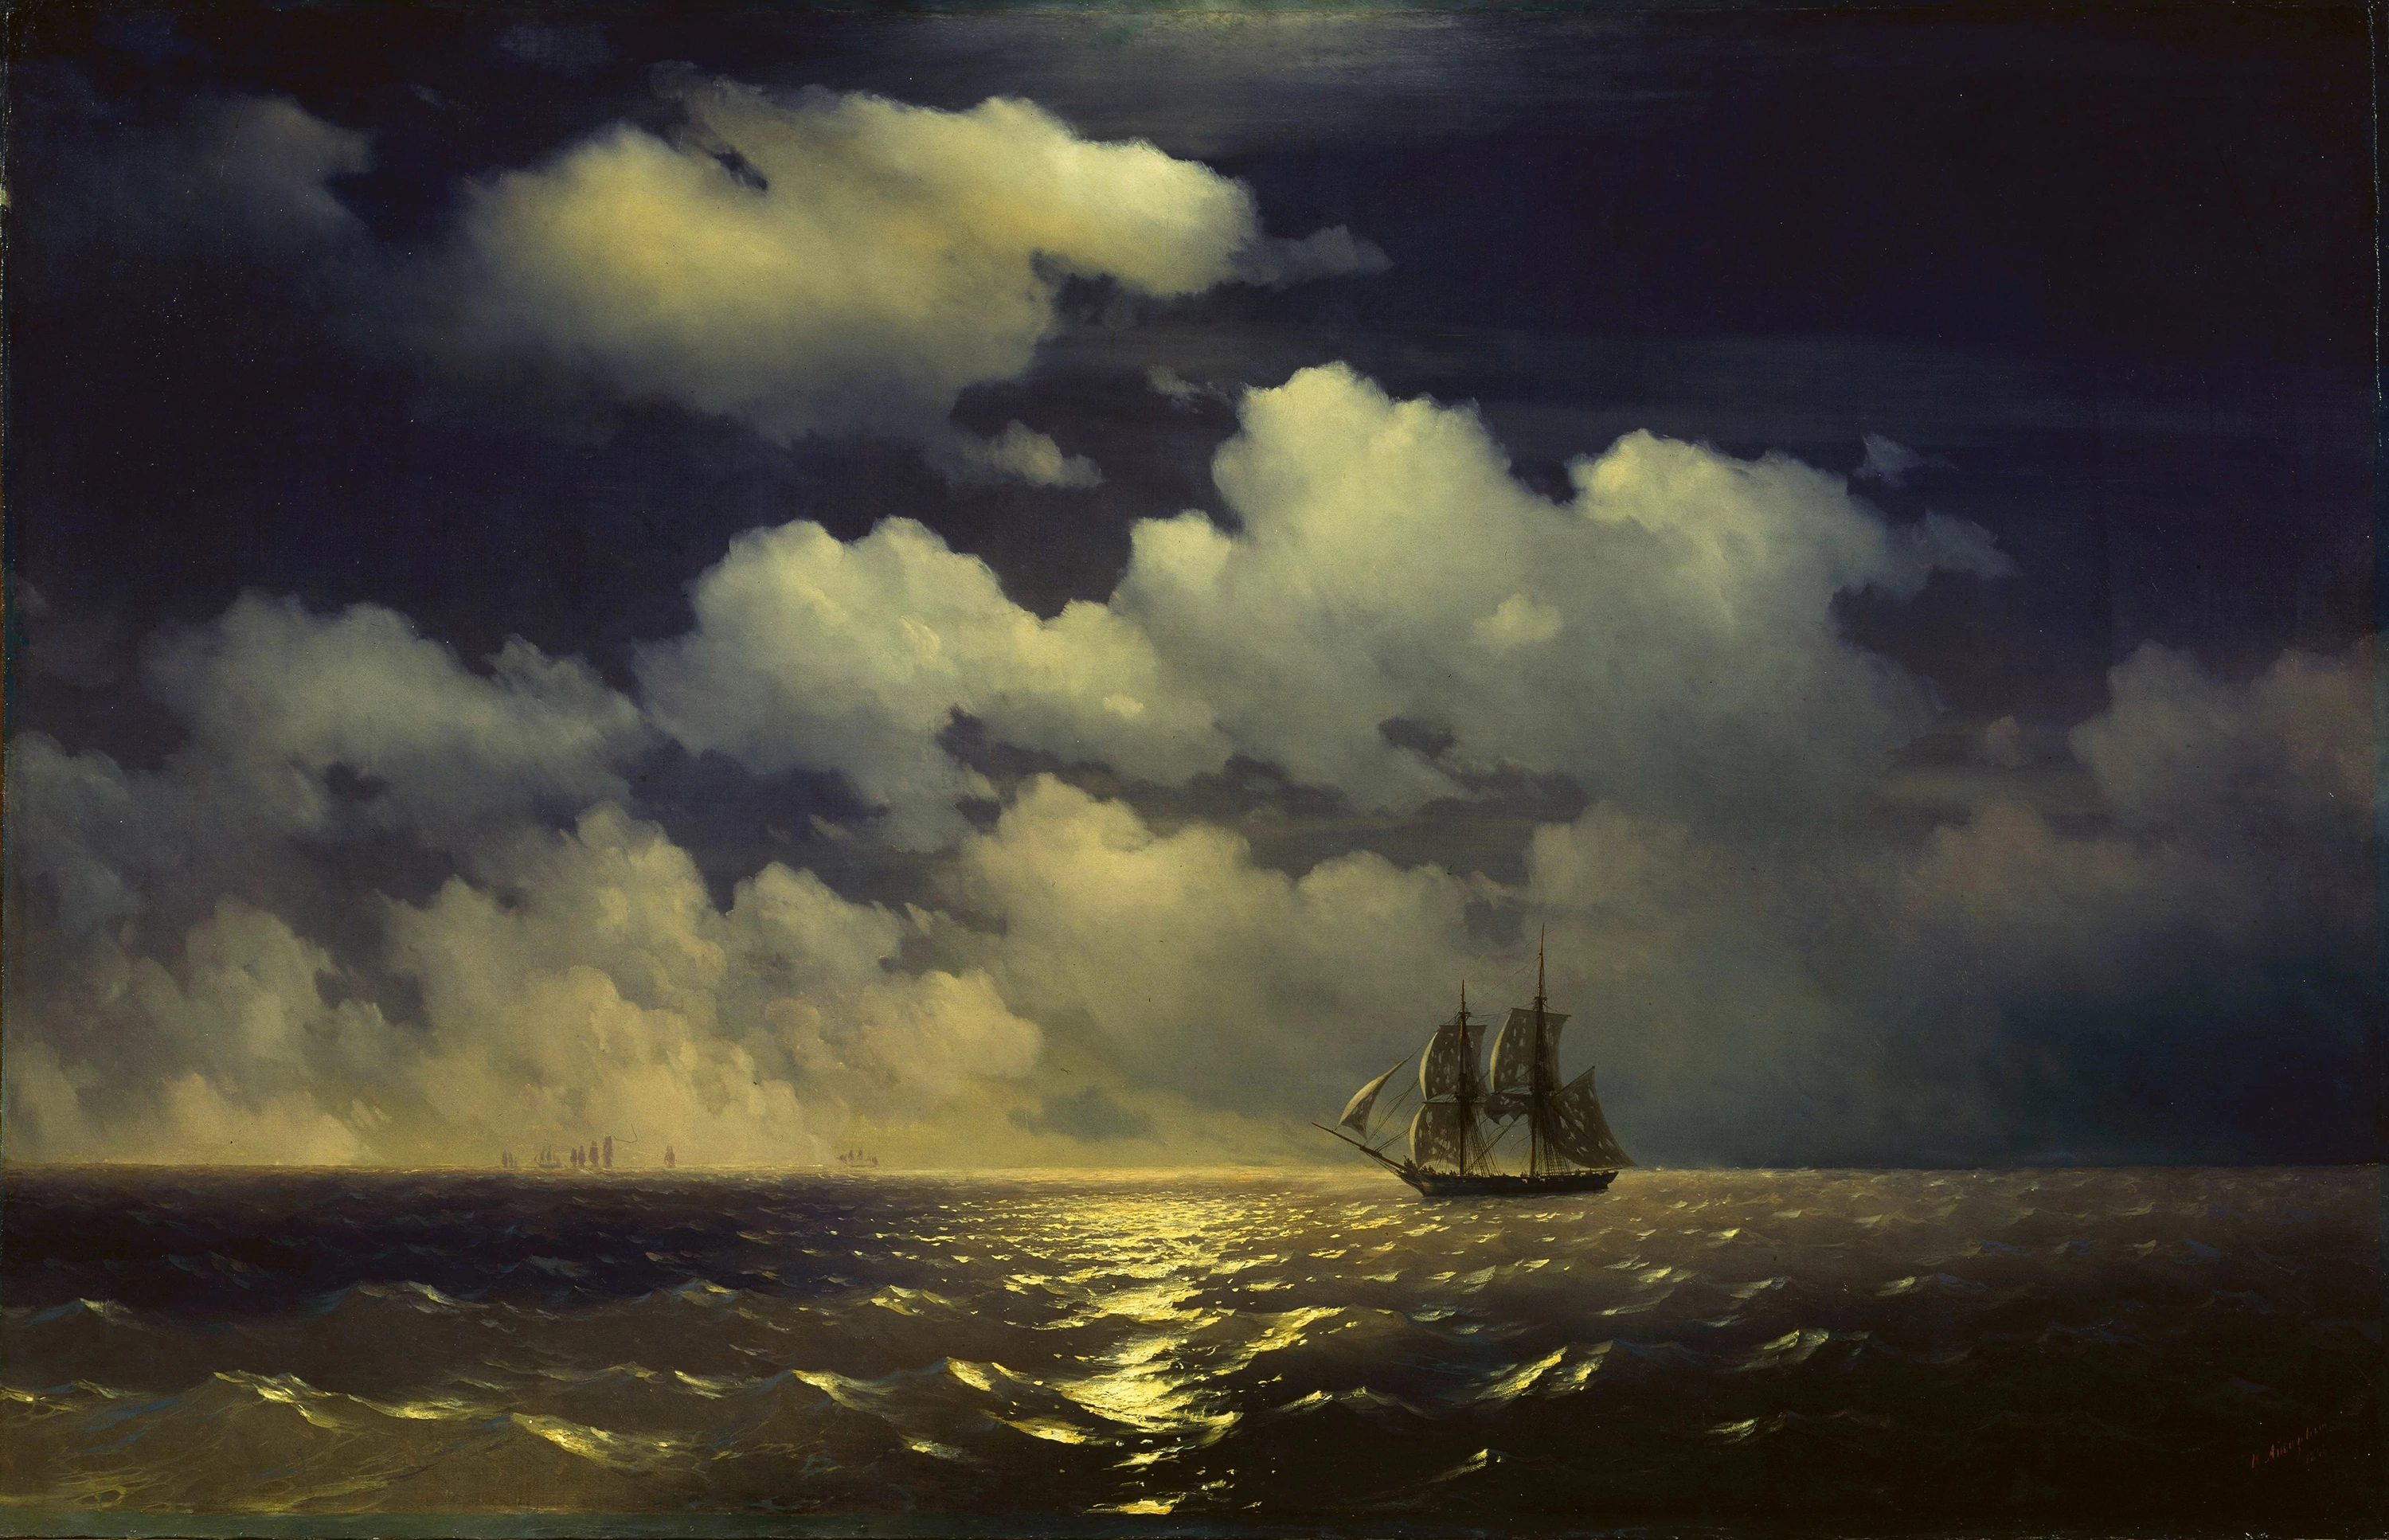 The brig Mercury encounter after defeating two Turkish ships, Ivan Aivazovsky